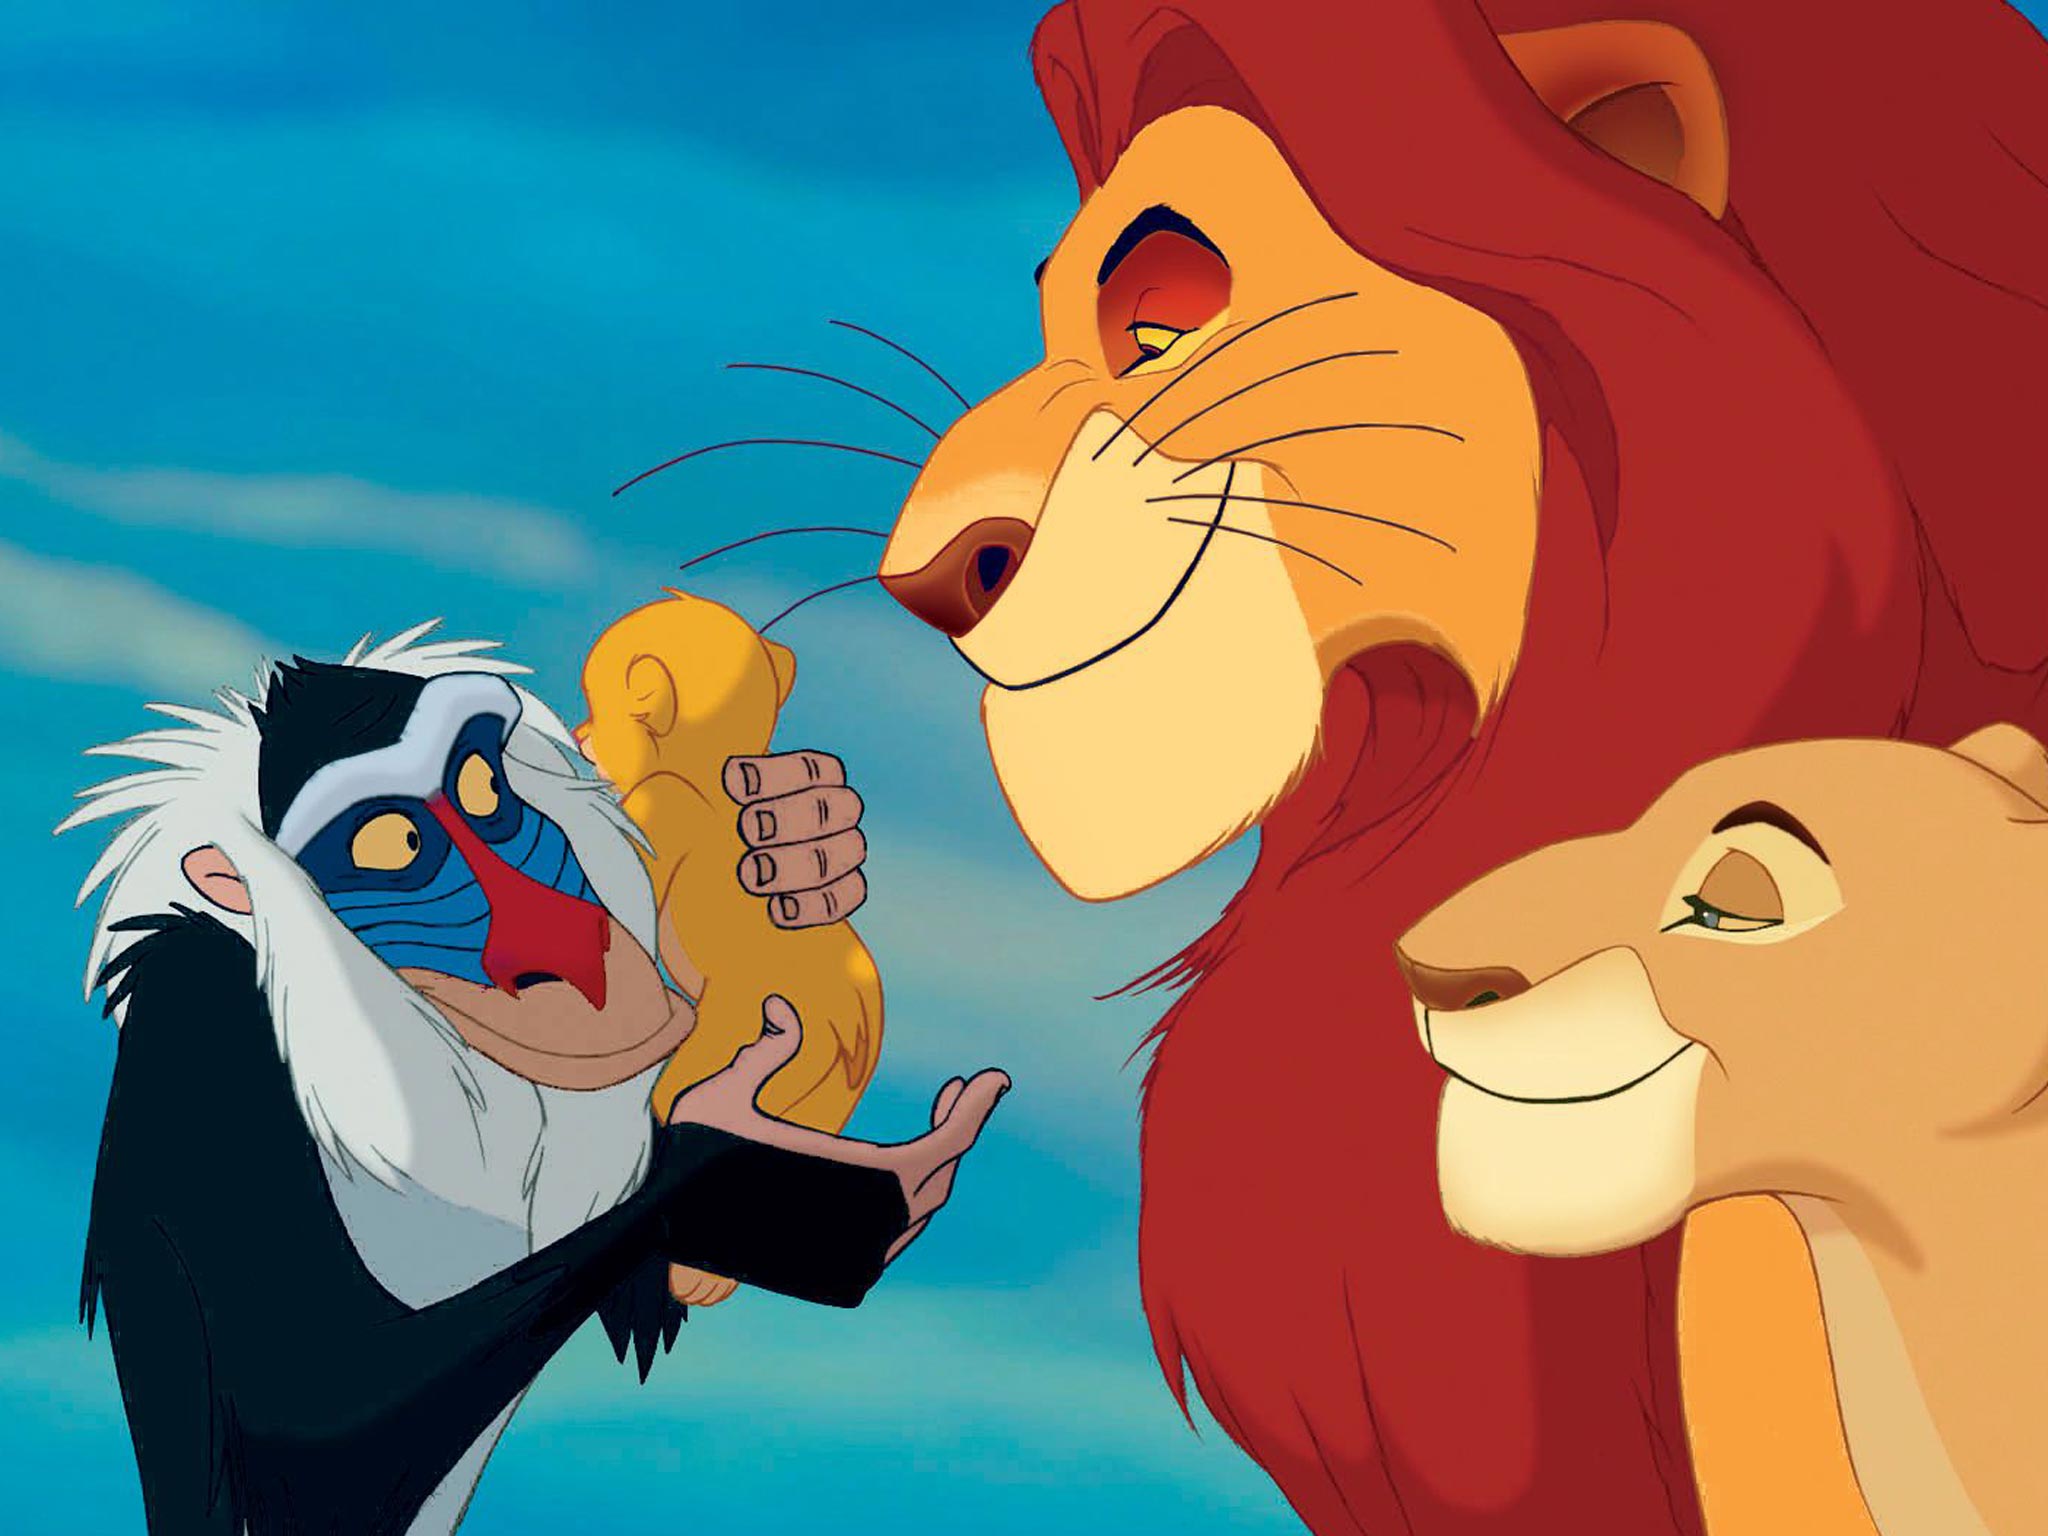 The circle of life, the moment before newborn cub Simba is shown to the rest of the kingdom in The Lion King